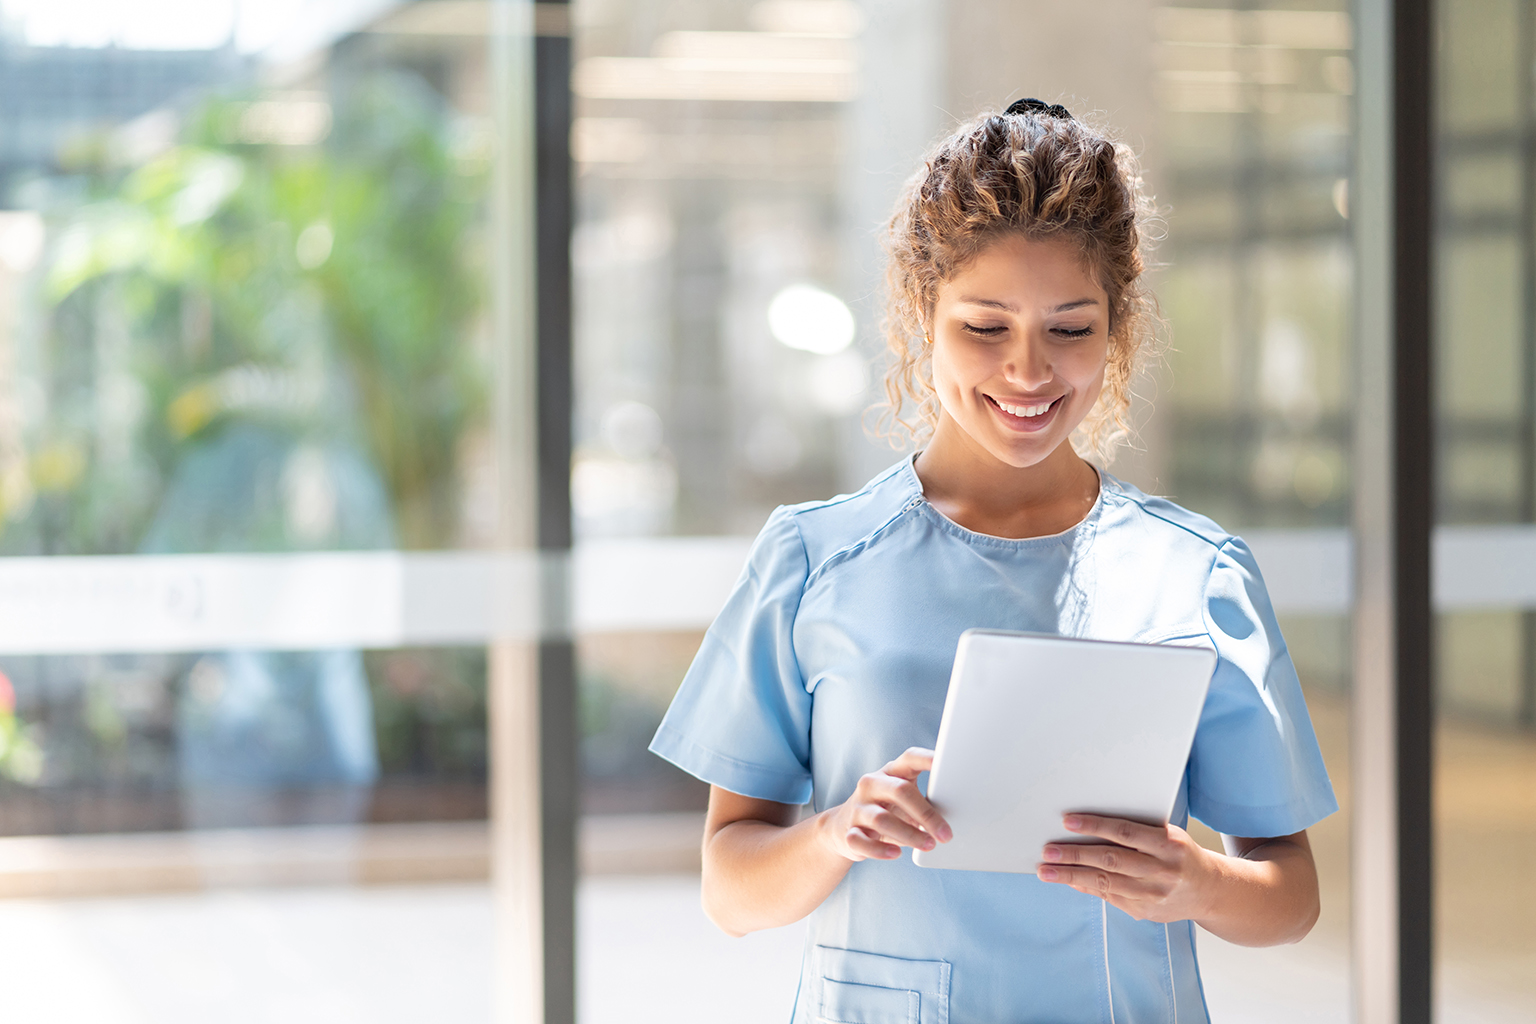 How prepared are new nurse graduates for practice today? Clinical judgment skills identified as a primary gap in practice readiness according to Wolters Kluwer report